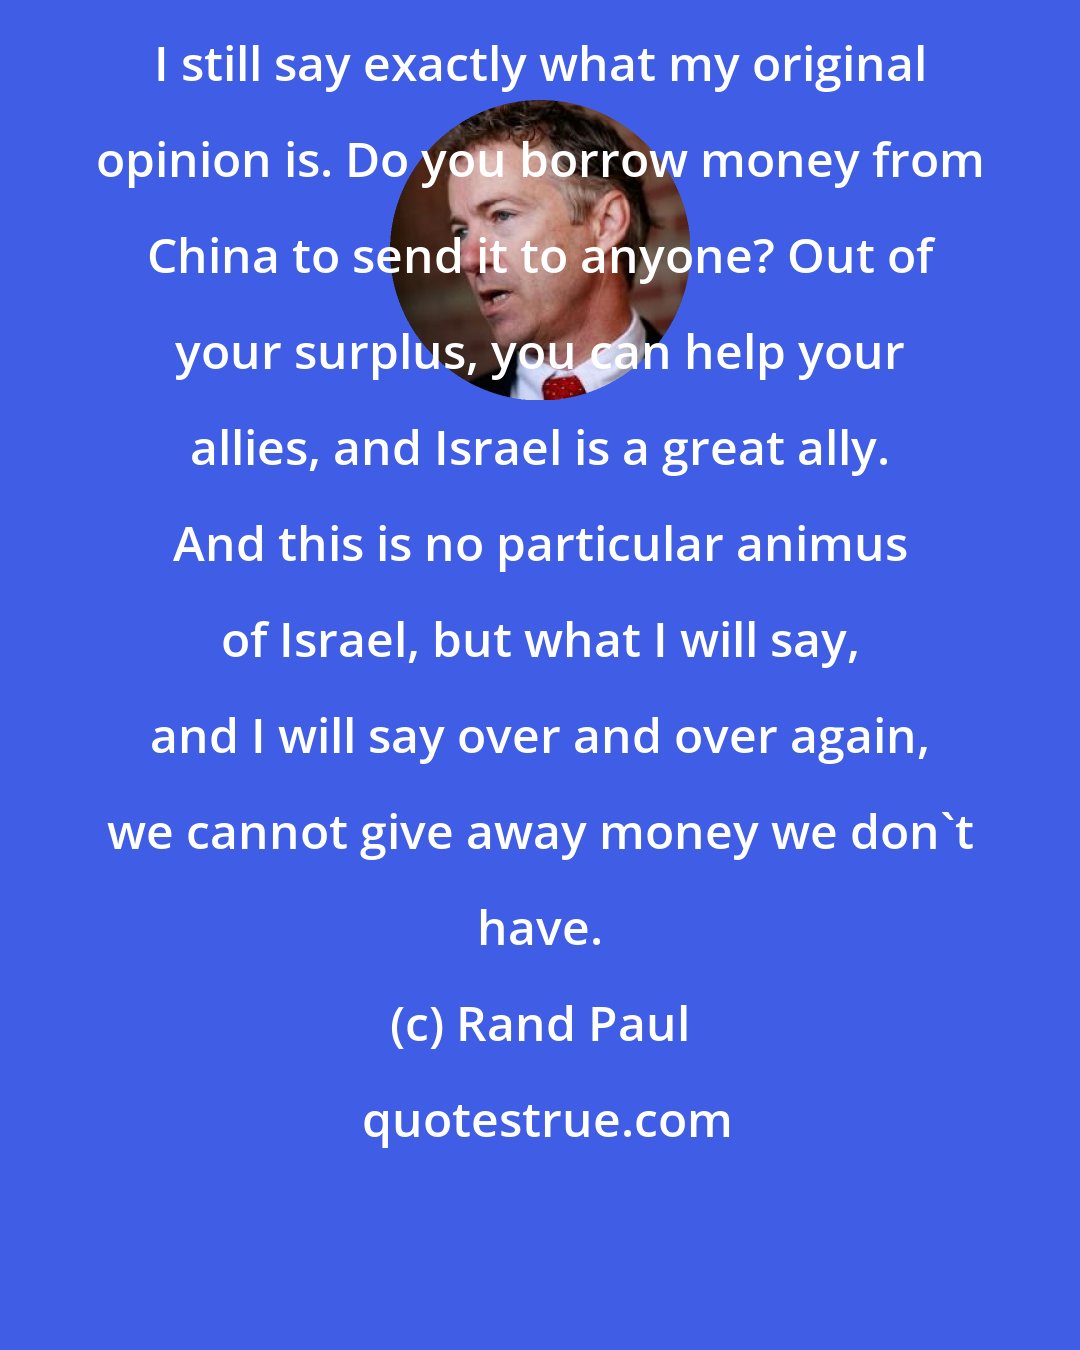 Rand Paul: I still say exactly what my original opinion is. Do you borrow money from China to send it to anyone? Out of your surplus, you can help your allies, and Israel is a great ally. And this is no particular animus of Israel, but what I will say, and I will say over and over again, we cannot give away money we don't have.